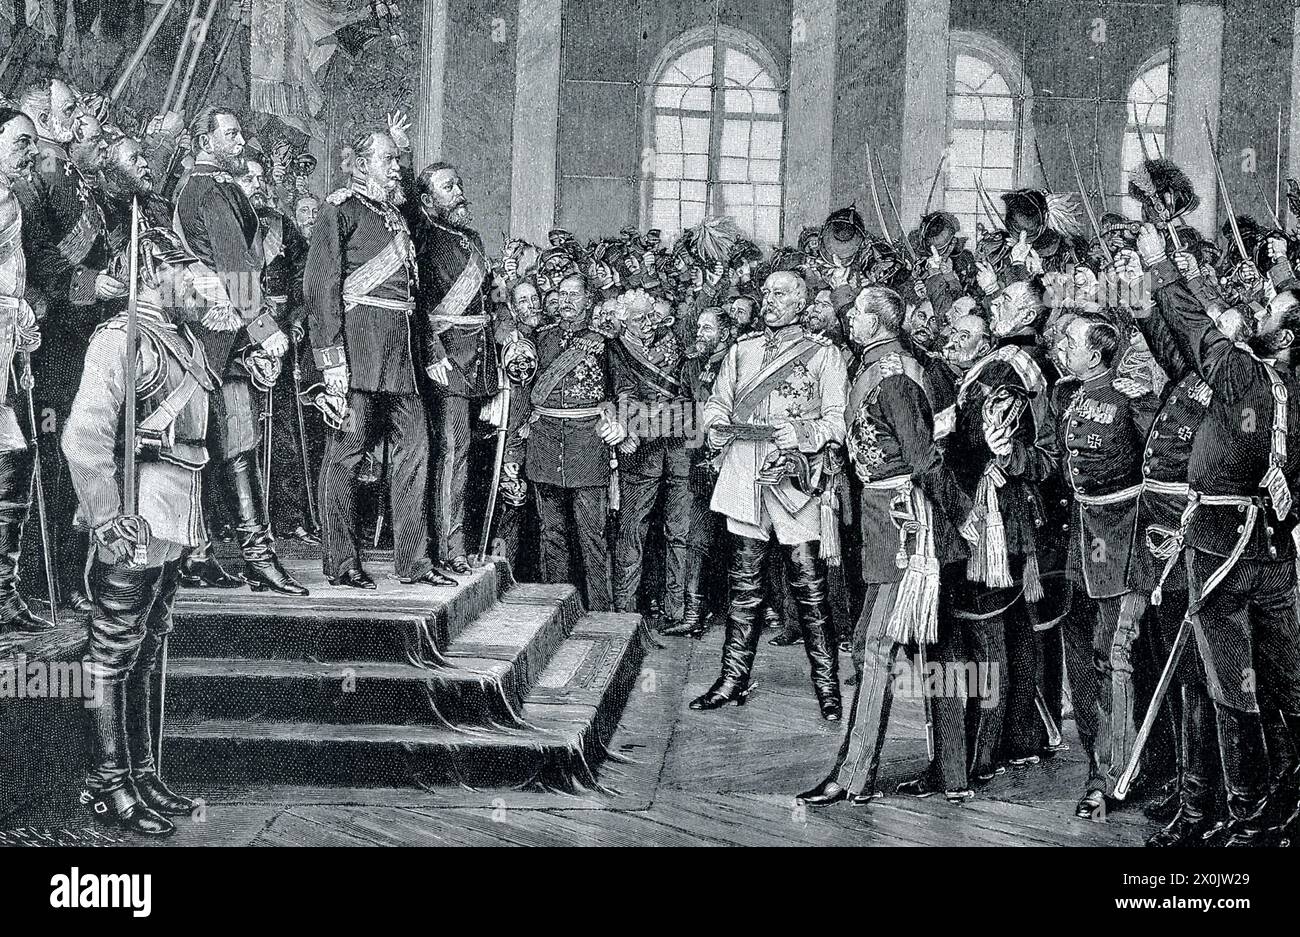 The early 1900s caption reads: 'King William proclaimed emperor at Versailles. It was while the German troops were still besieging Paris that the union of their country became an accomplished fact. King William of Prussia, unanimously chosen as its ruler, was proclaimed emperor, not at Berlin, but at Versailles, the captured palace of the French kings, in the famous ‘hall of mirrors,’ built by Louis XIV. Around the new emperor were gathered, not men of peace, but warriors and princes, Bismarck the Iron Chancellor, and Moltke the greatest commander of the age.' Stock Photo